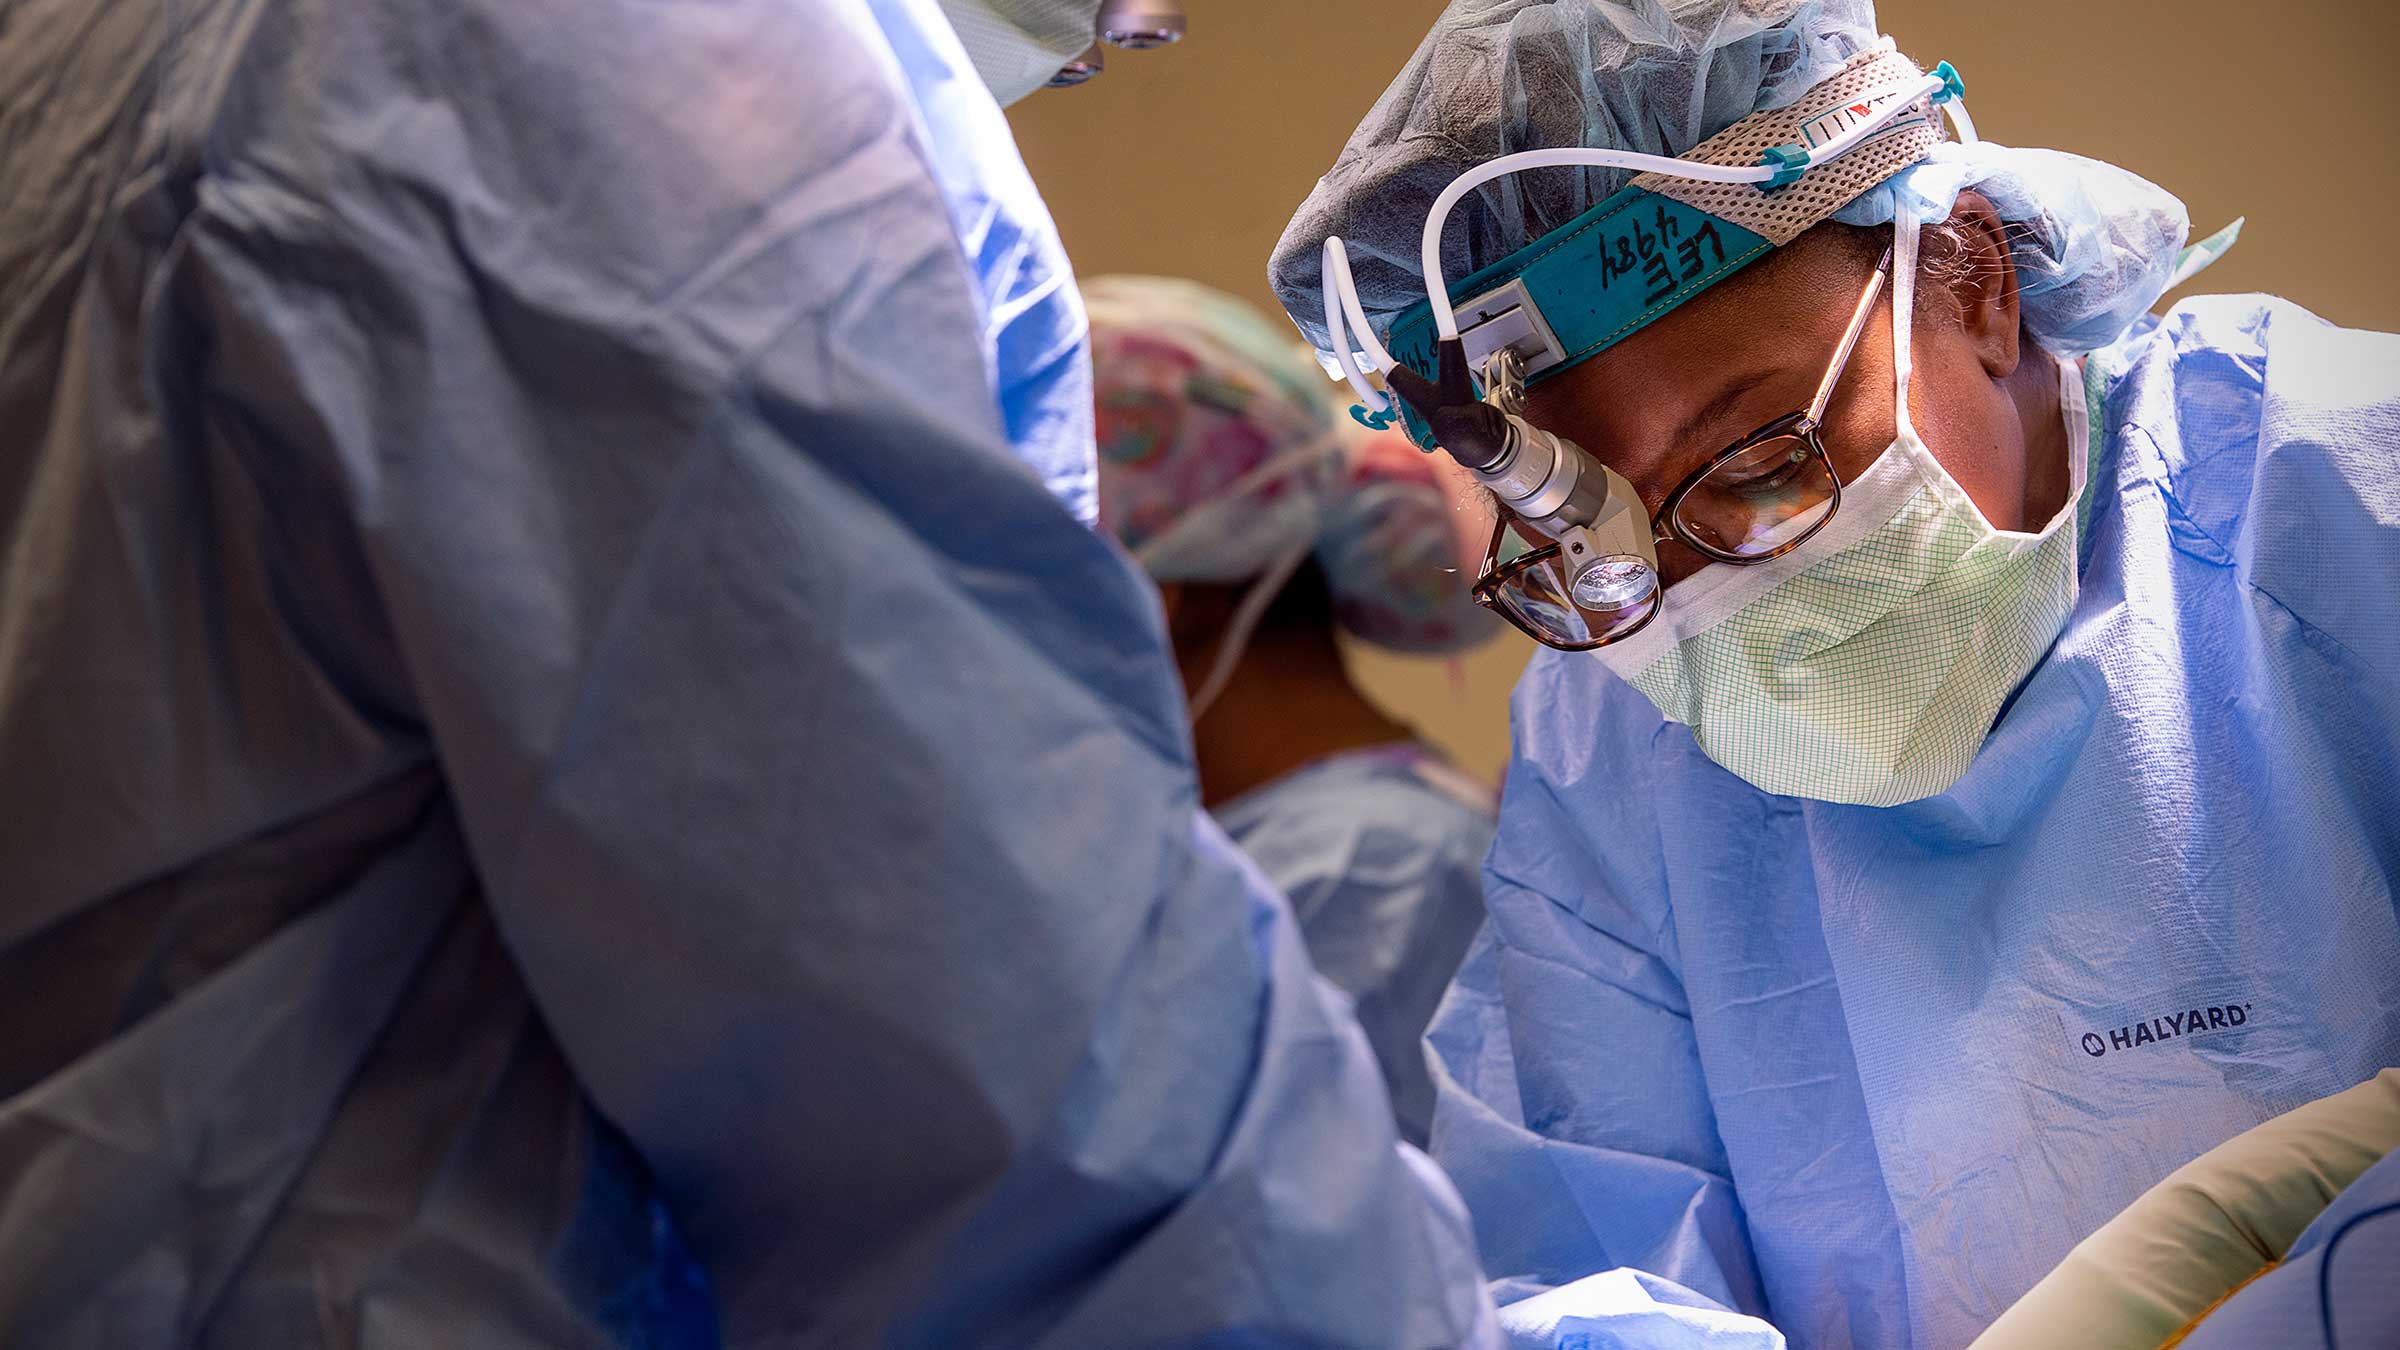 Cheryl Lee, MD, a urologic oncologist, in the operating room